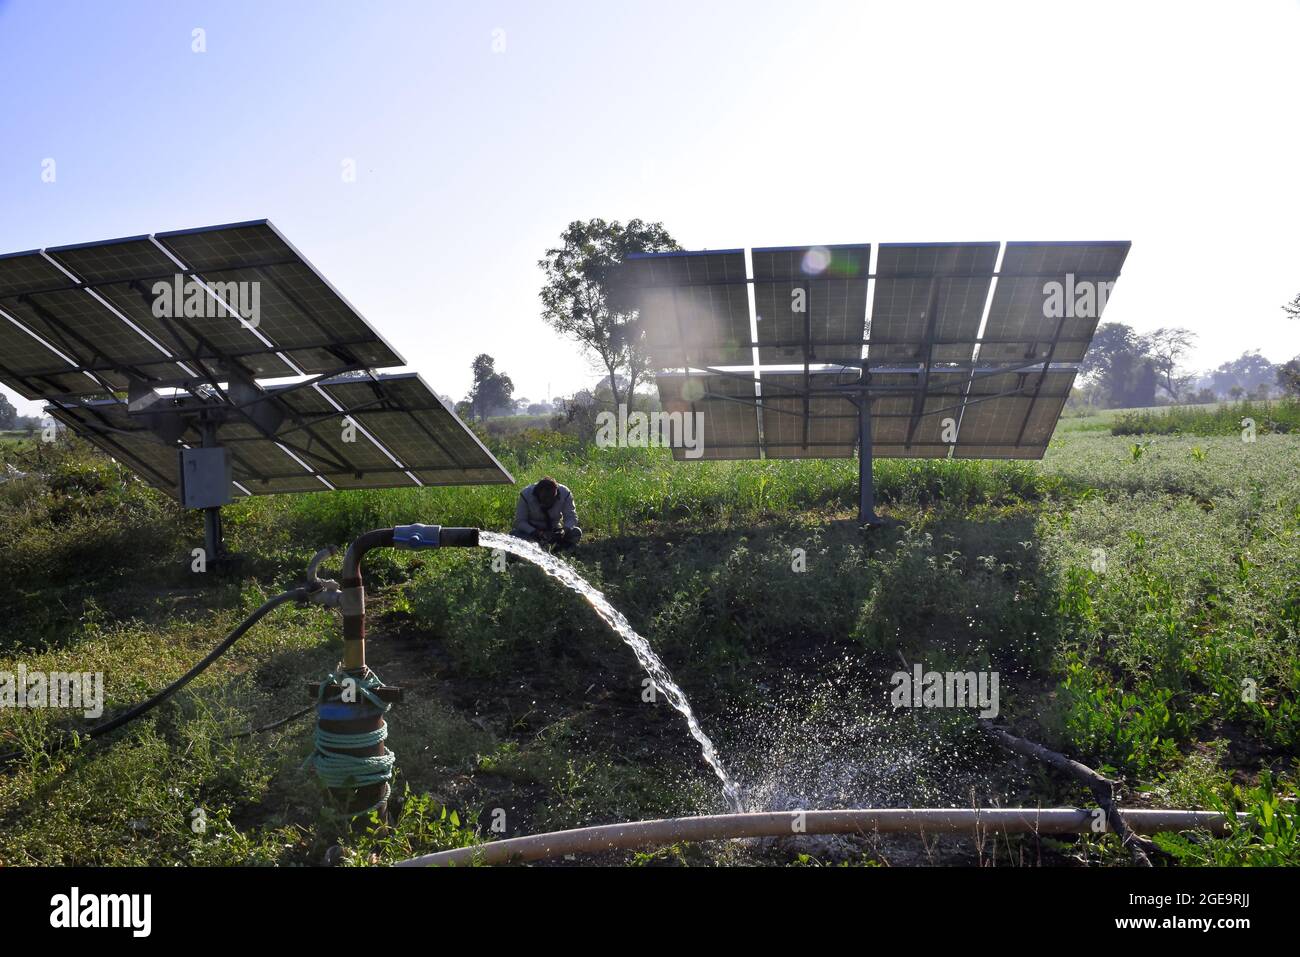 agricultural equipment for field irrigation, water jet, behind which is solar panel's, Stock Photo